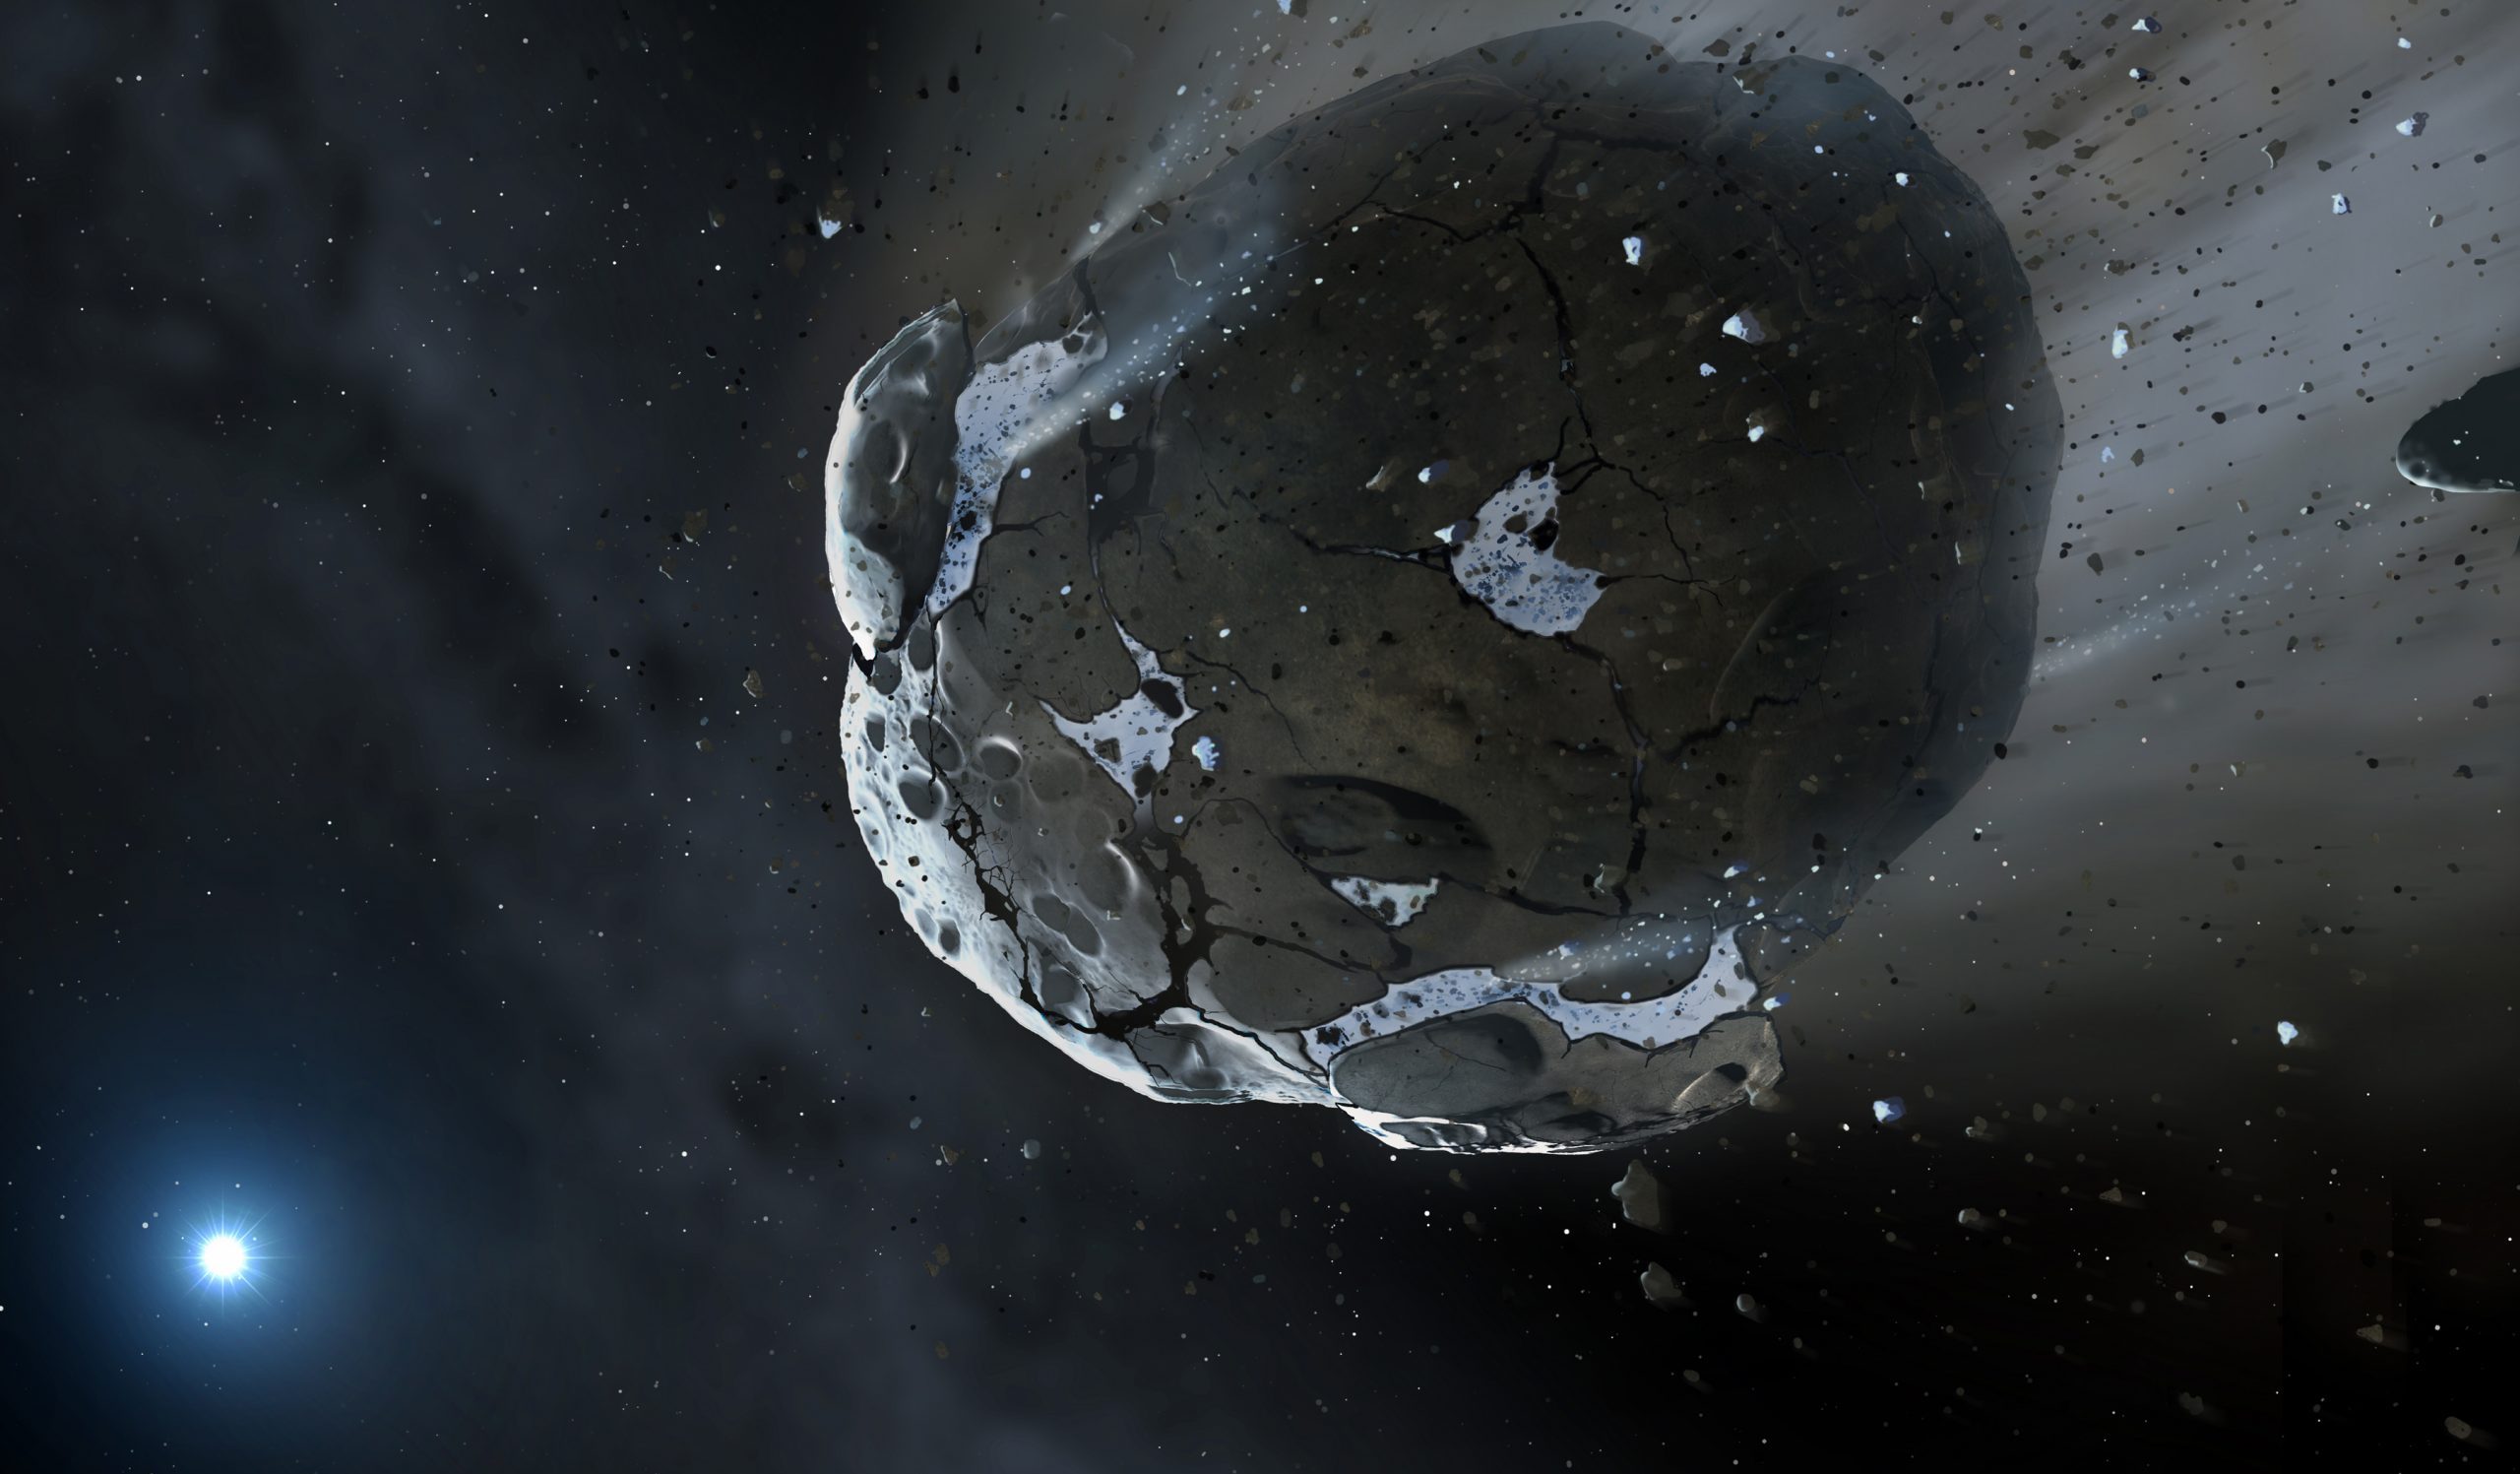 Artist's impression of an asteroid or a comet like Bernardinelli-Bernstein. Credit: Mark A. Garlick, space-art.co.uk, University of Warwick and University of Cambridge